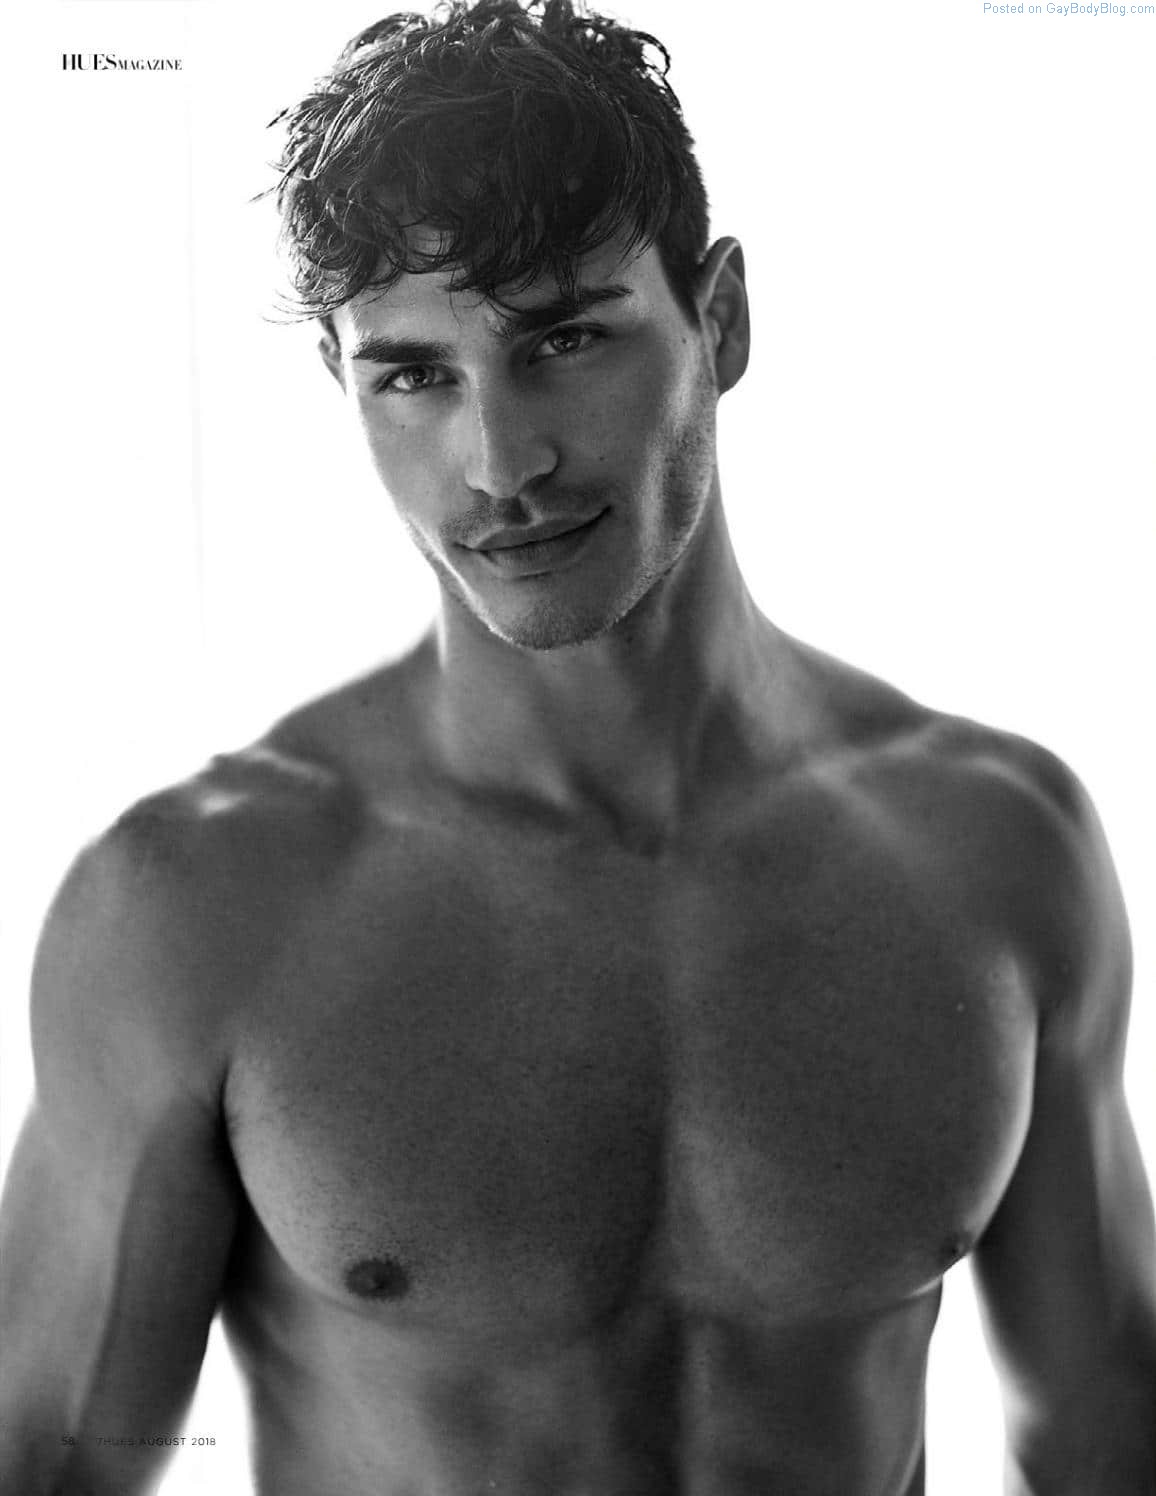 Male Model Alec Bitar Knows How To Tease With Those Sultry Looks Gay Body Blog Pics Of Male